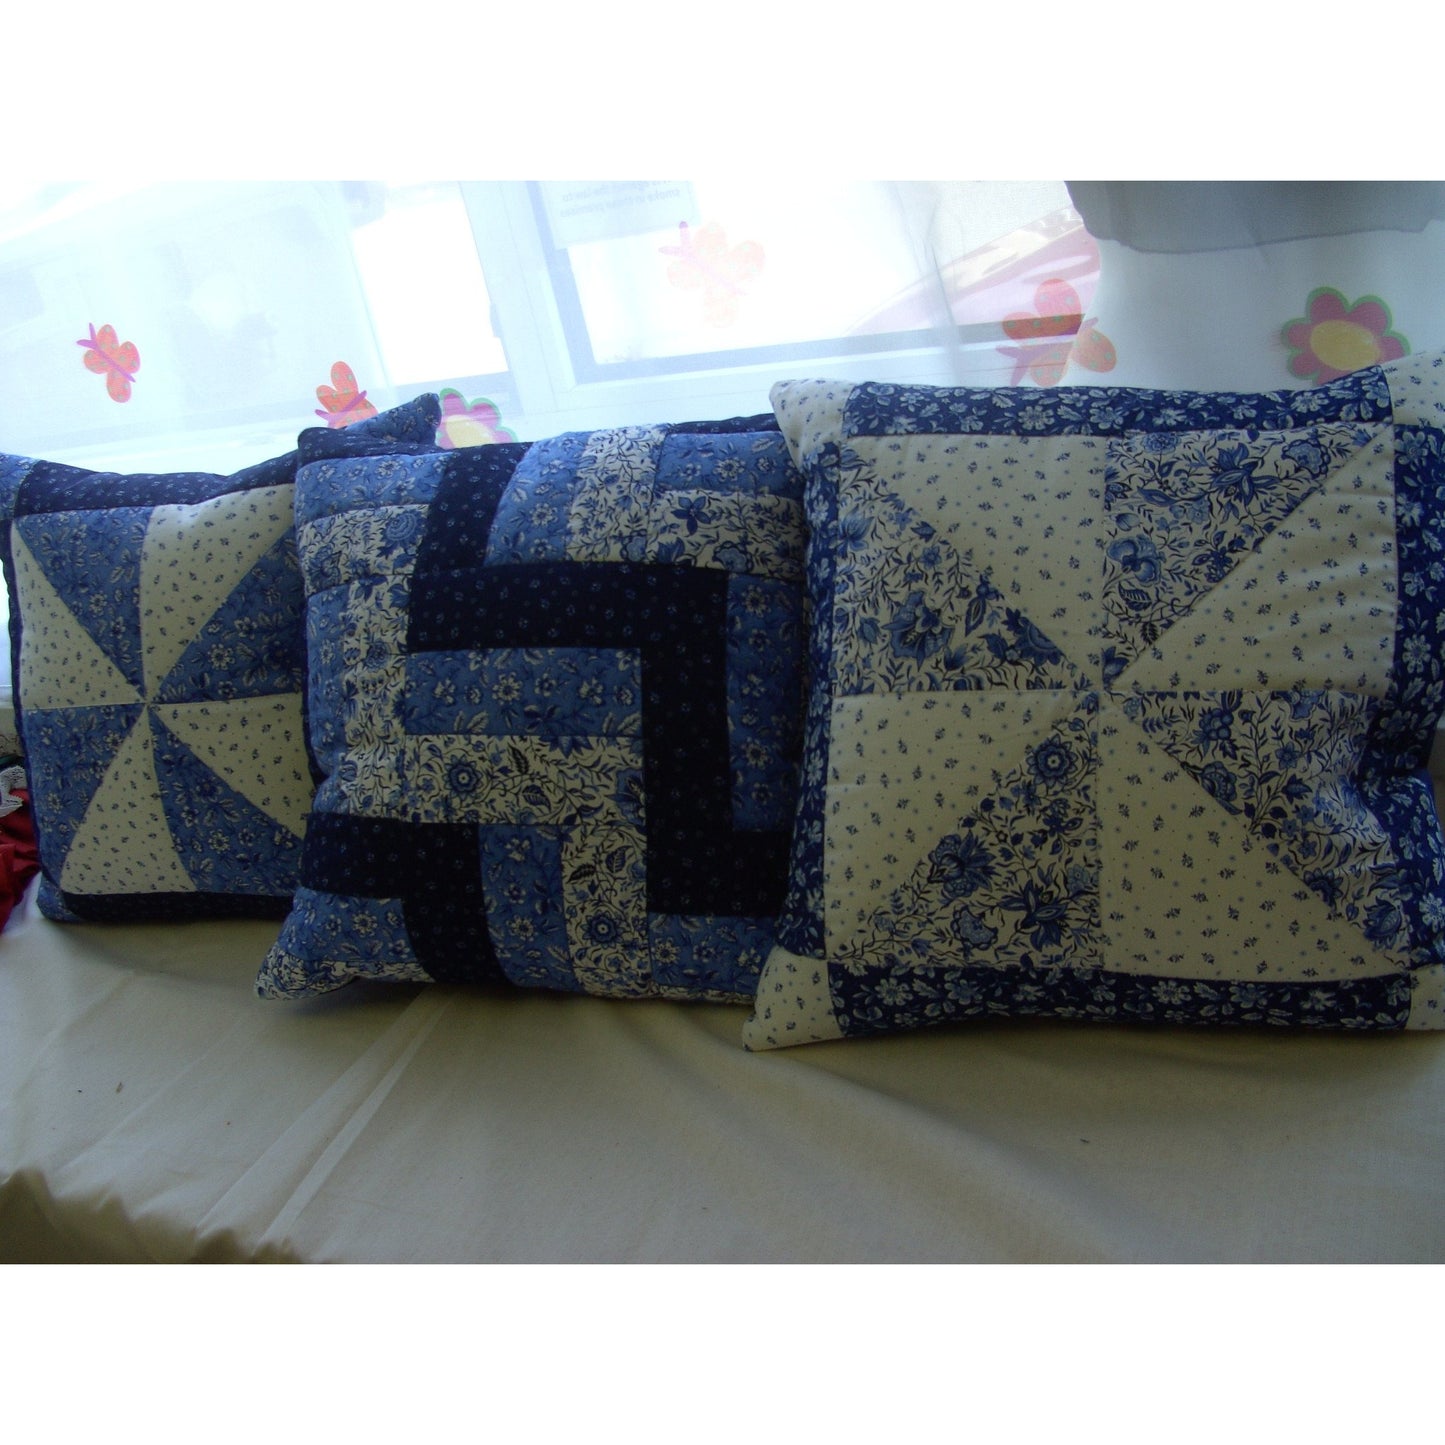 All about cushions, Cushion Making Course, Saturday October 14th and 28th from 10am till 4pm - MadOnSewing